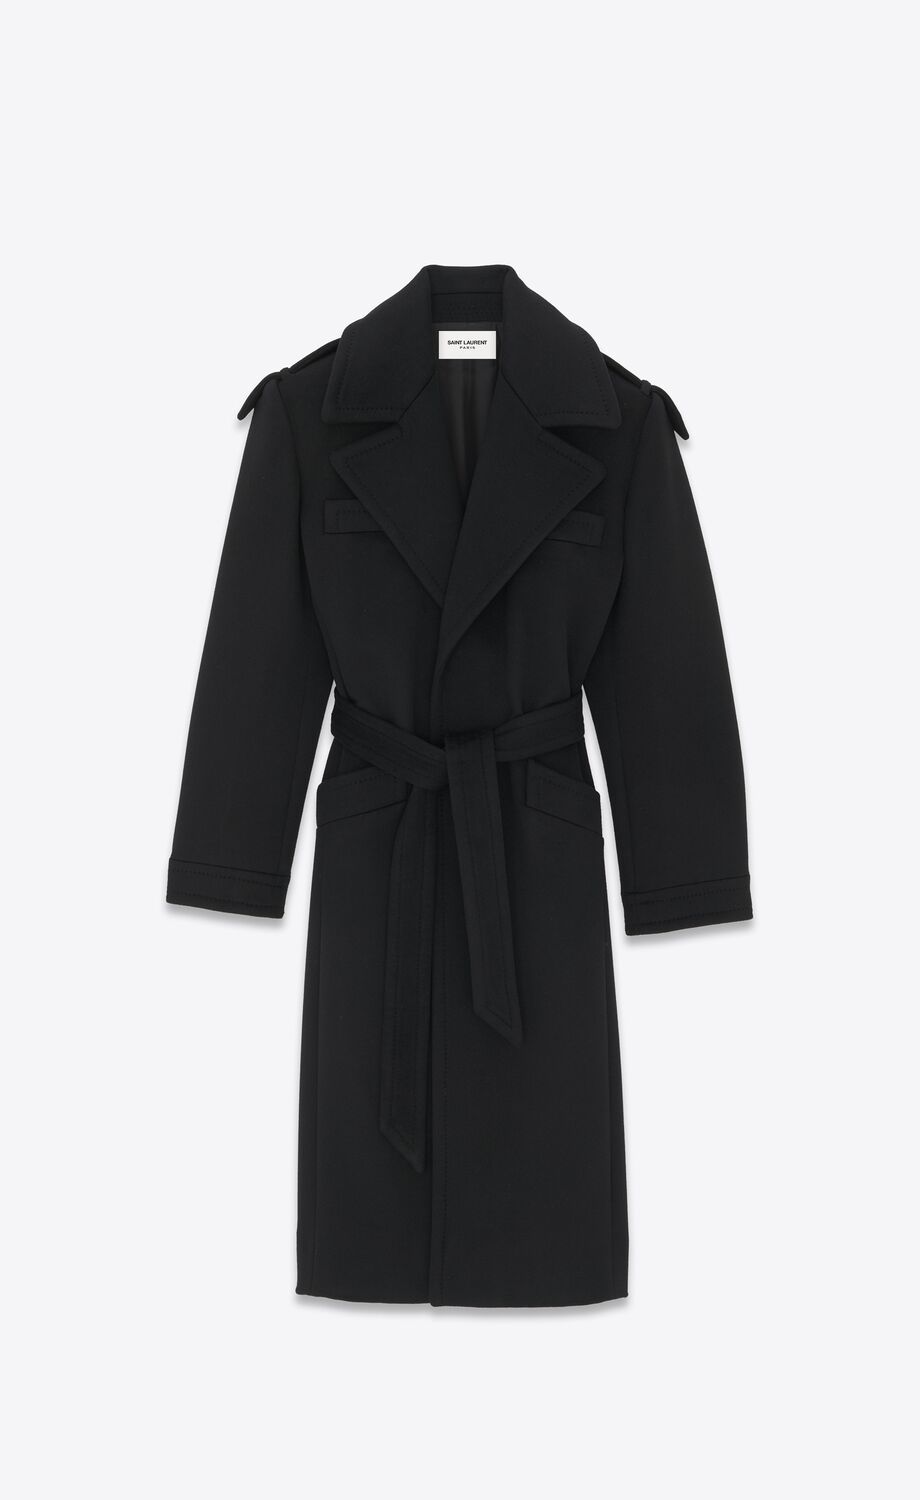 Belted coat in cashmere and wool | Saint Laurent | YSL.com